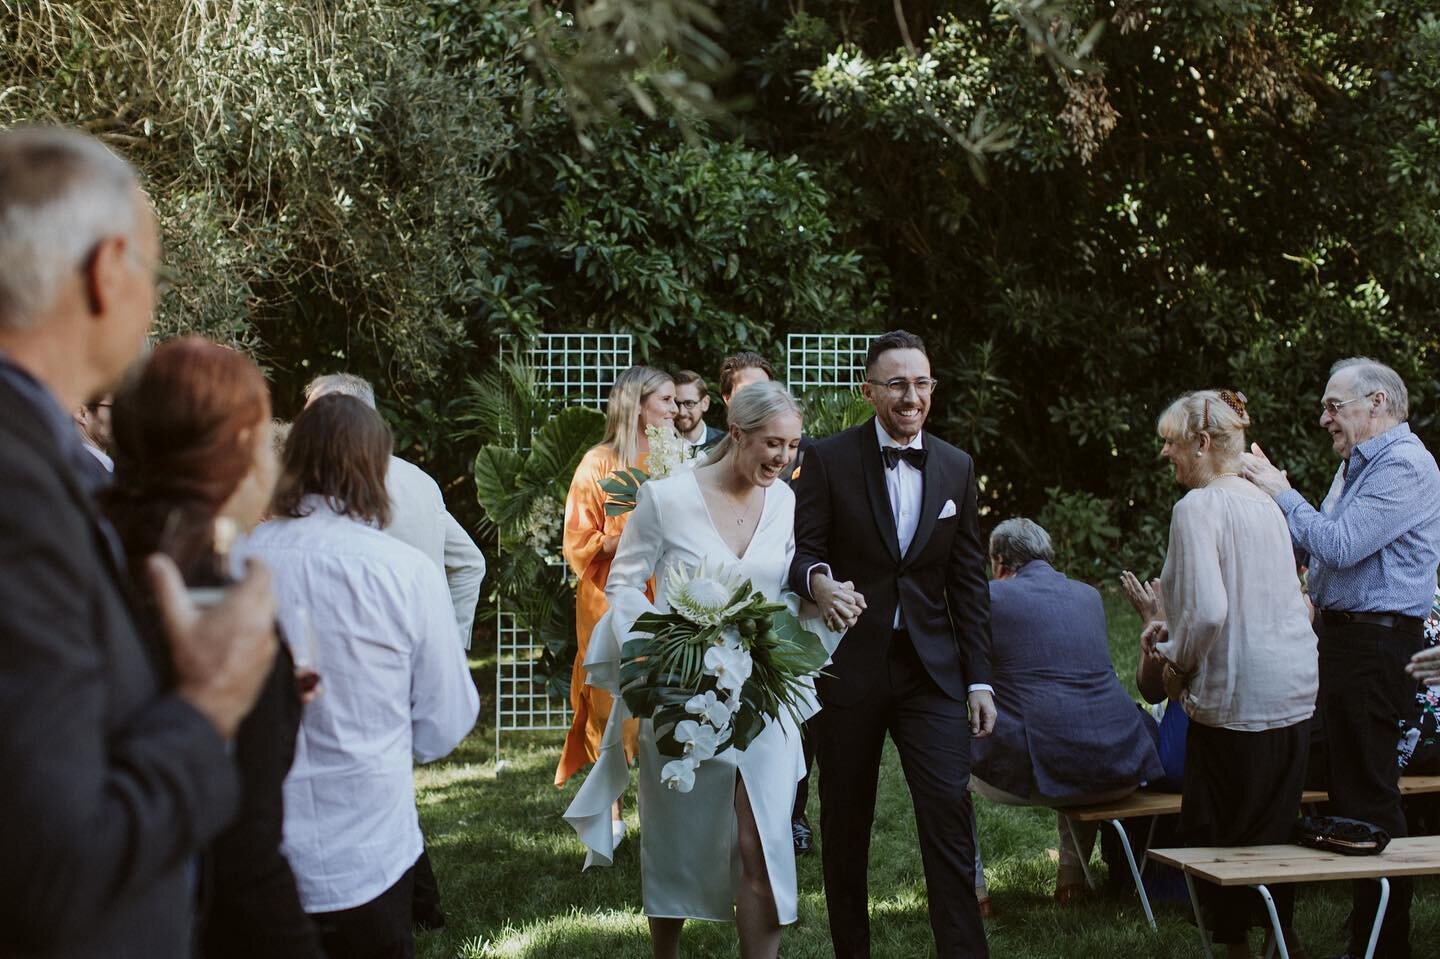 TOTAL JOY // The surreal feeling of walking back up the aisle as a married couple is like no other. If a joy-filled, fun, celebration is what you want for your wedding ceremony, get in touch! 🤍